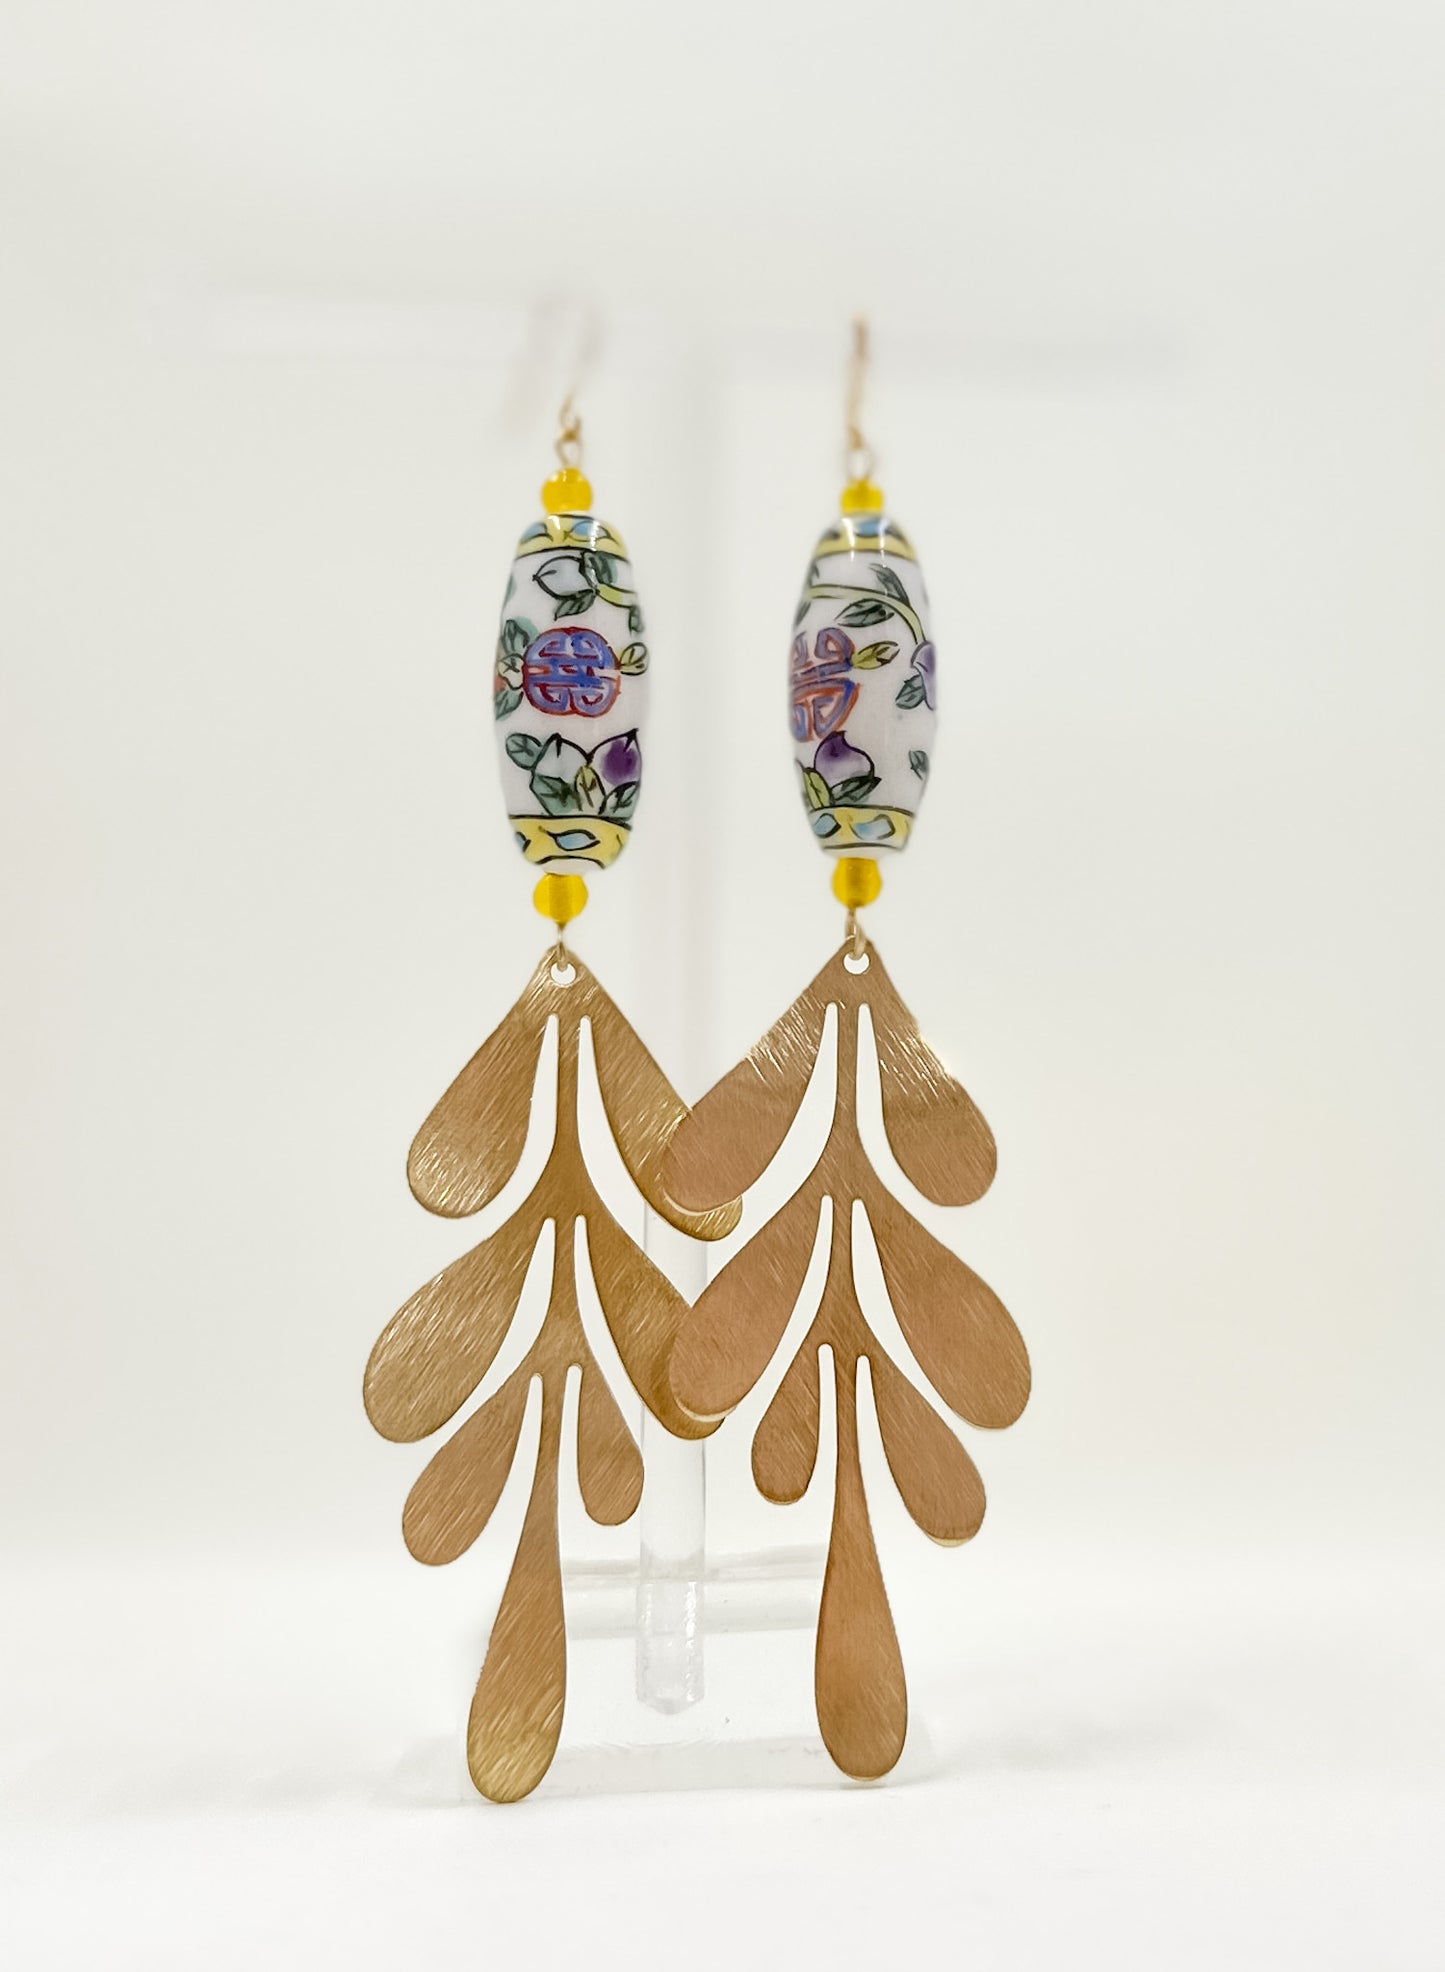 Vintage Porcelain Hand Painted Leafy and Geometric Bead Earrings with Brushed Brass Leaves